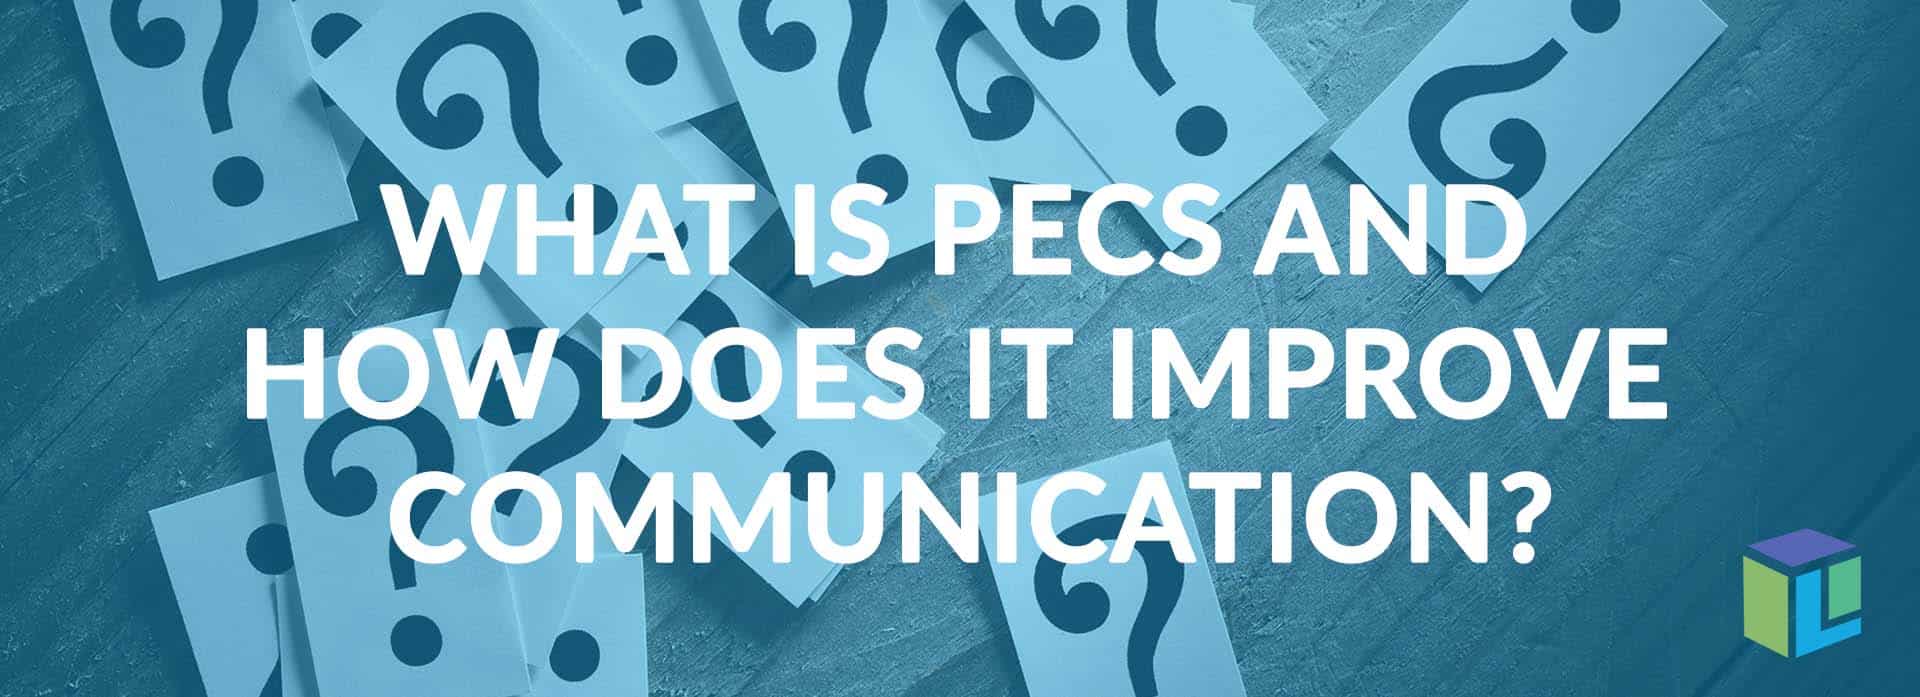 What Is PECS And How Does It Improve Communication?